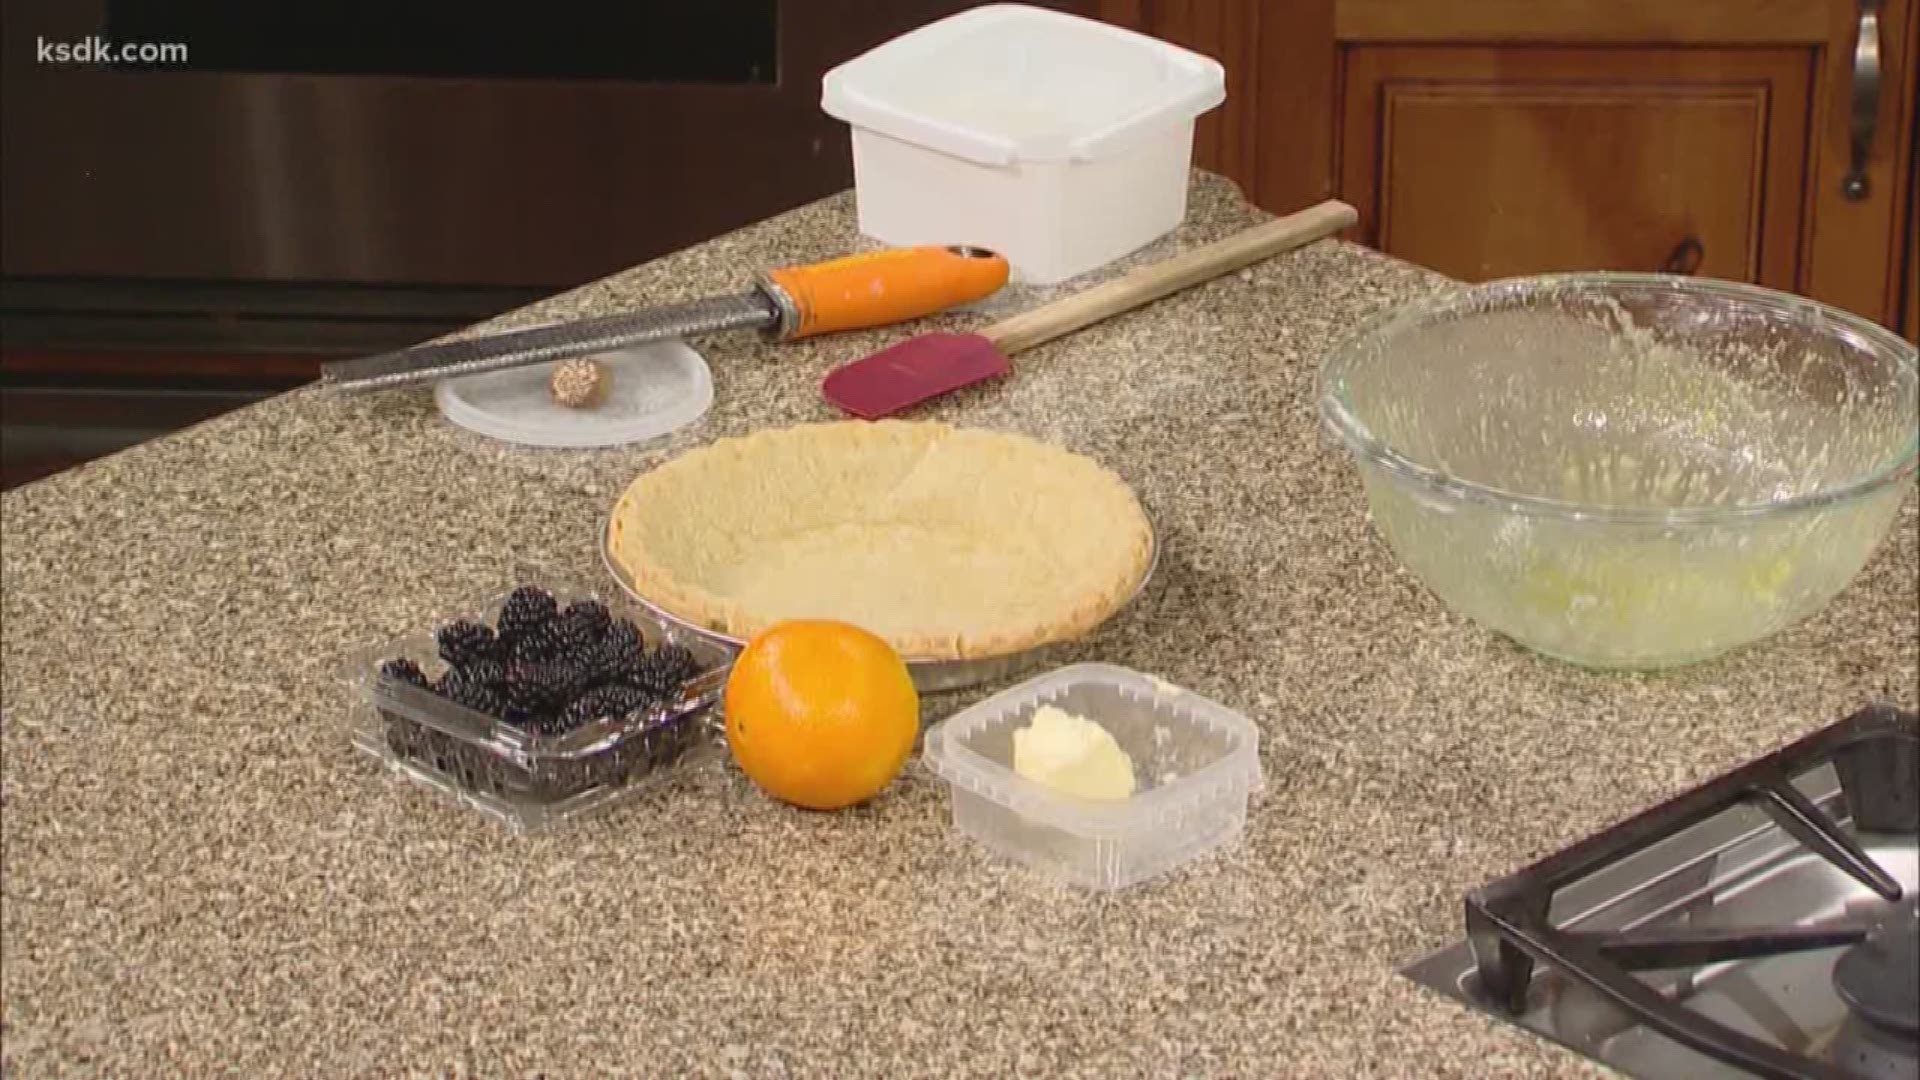 Chef Rob Connoley of Bulrush Restaurant started the week off with a recipe for Vinegar Pie.